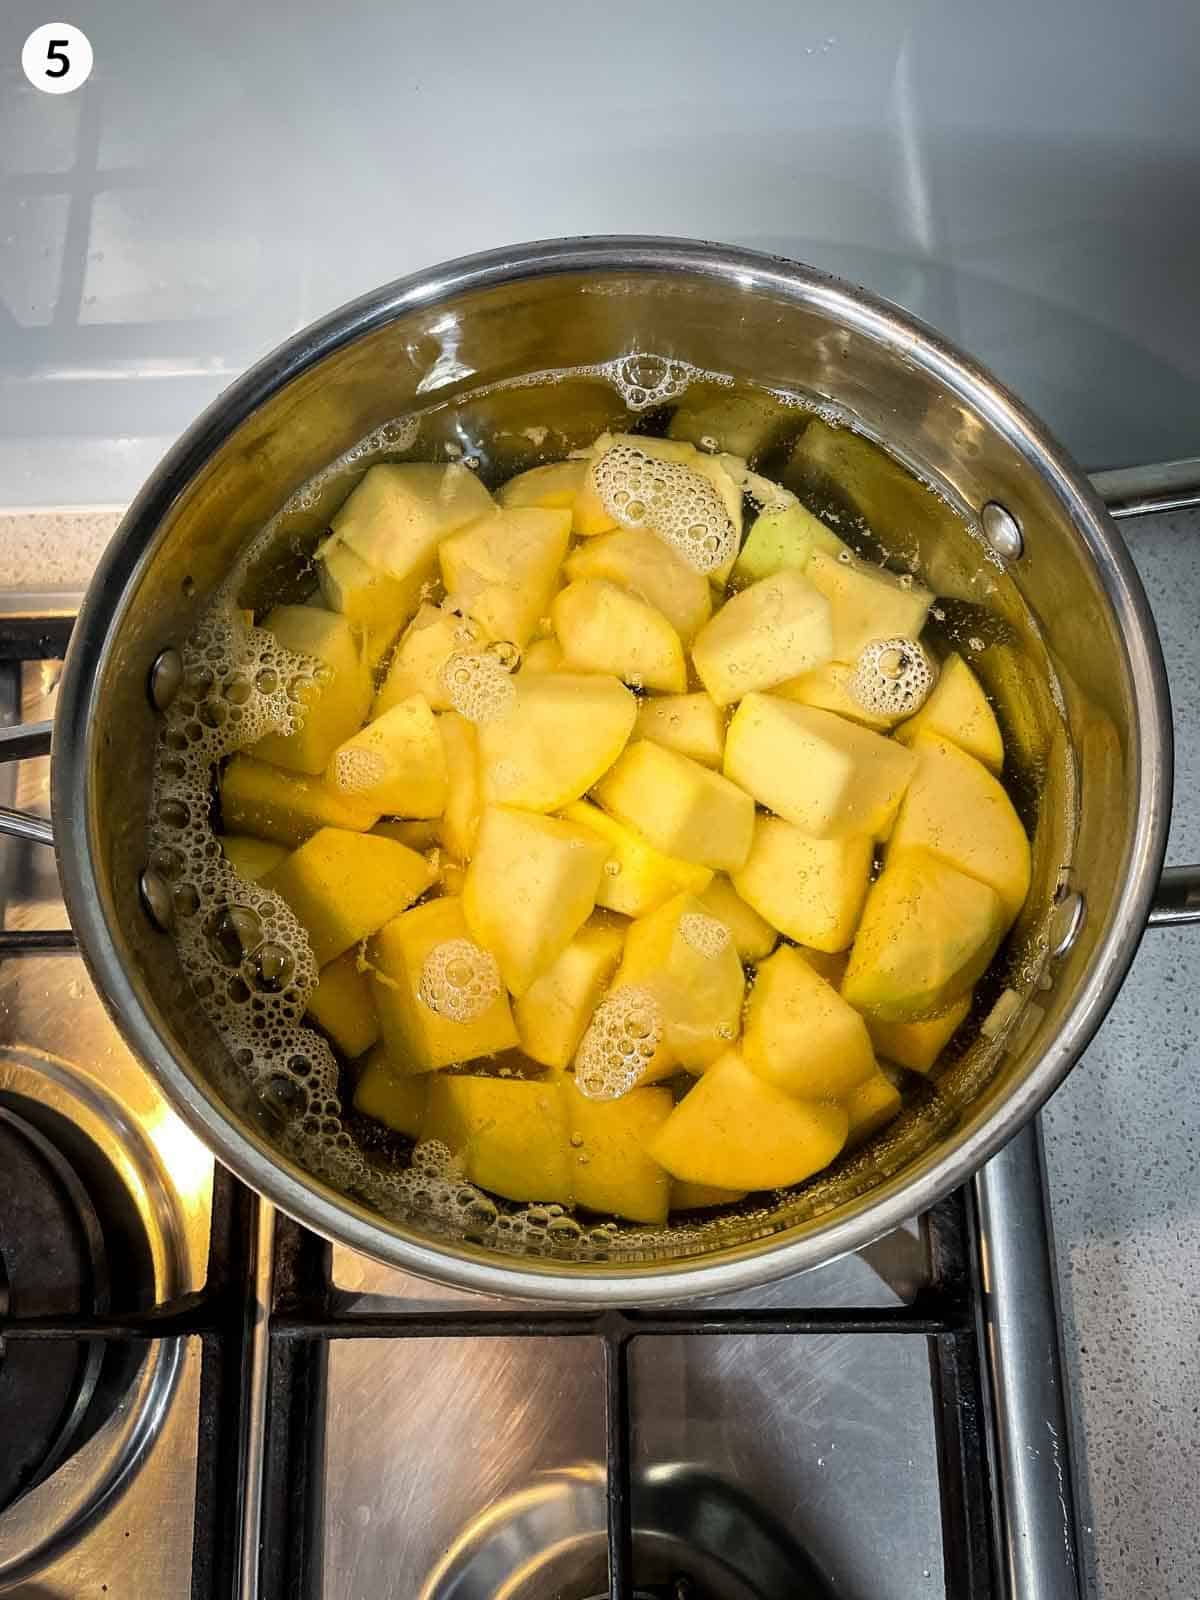 Cooking cut swede in a saucepan of water on a stovetop